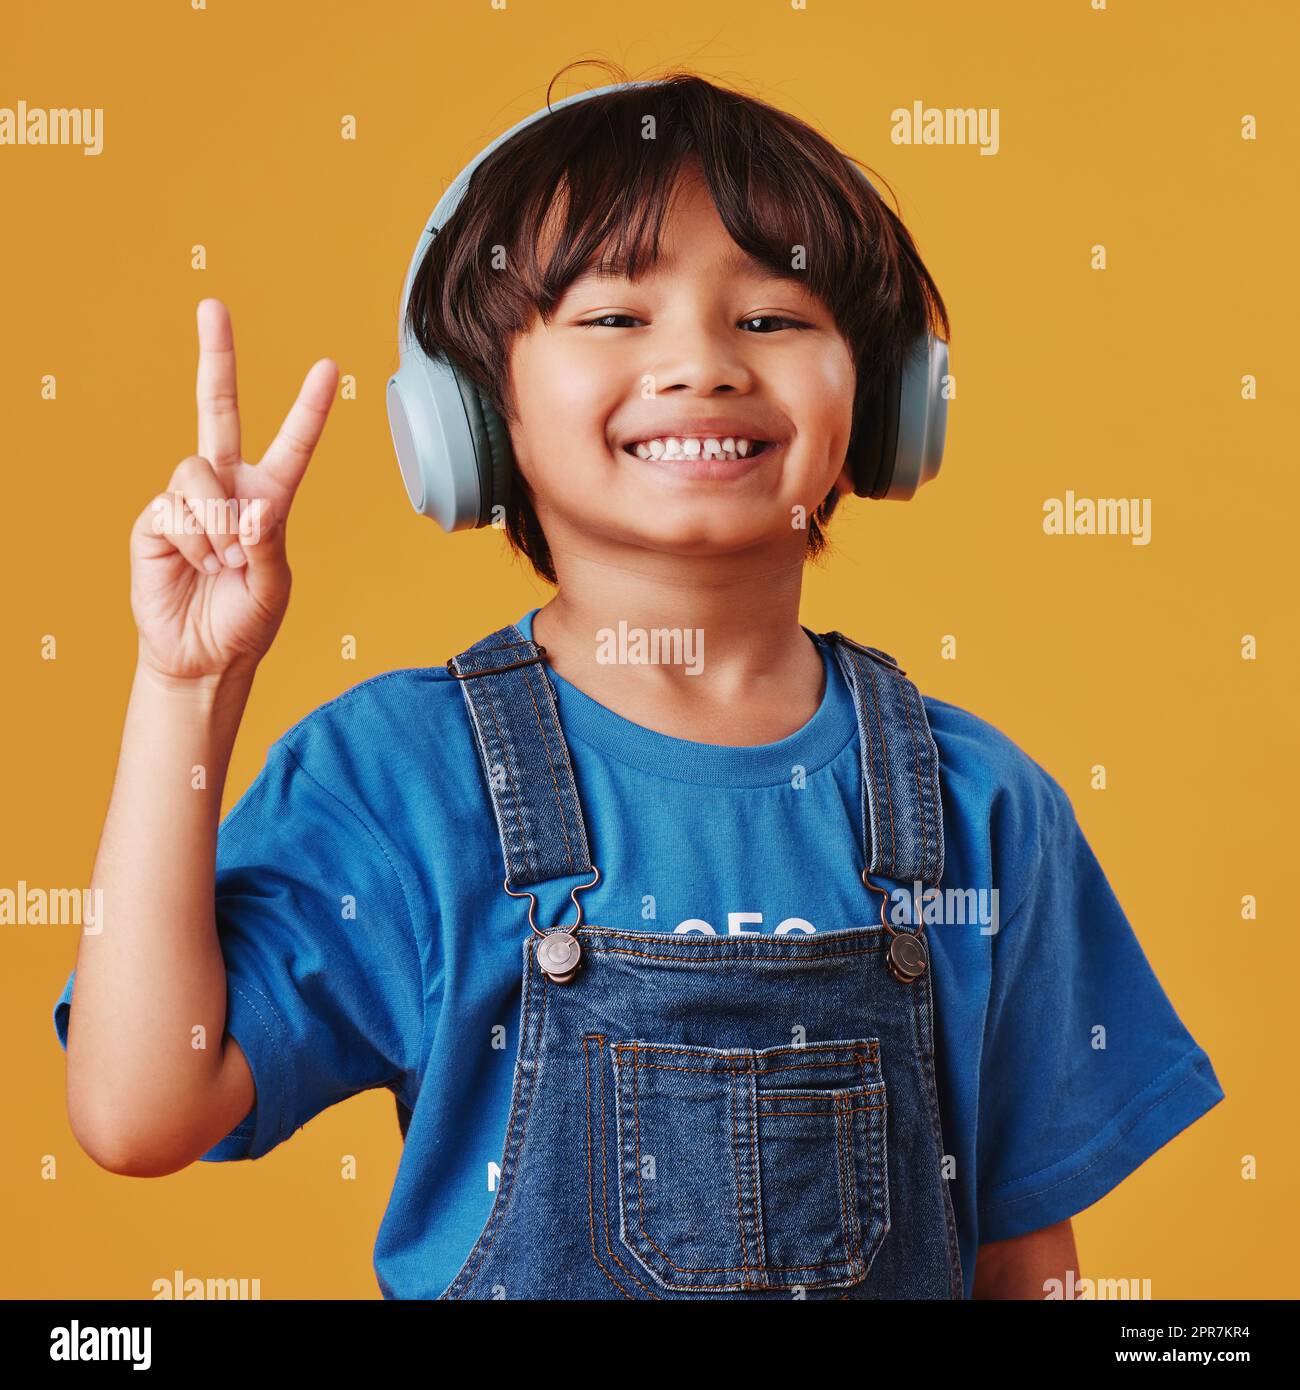 A cute little asian boy enjoying listening to music while wearing headphones and making a peace gesture against an orange copyspace background .Adorable Chinese kid feeling the magic of music Stock Photo